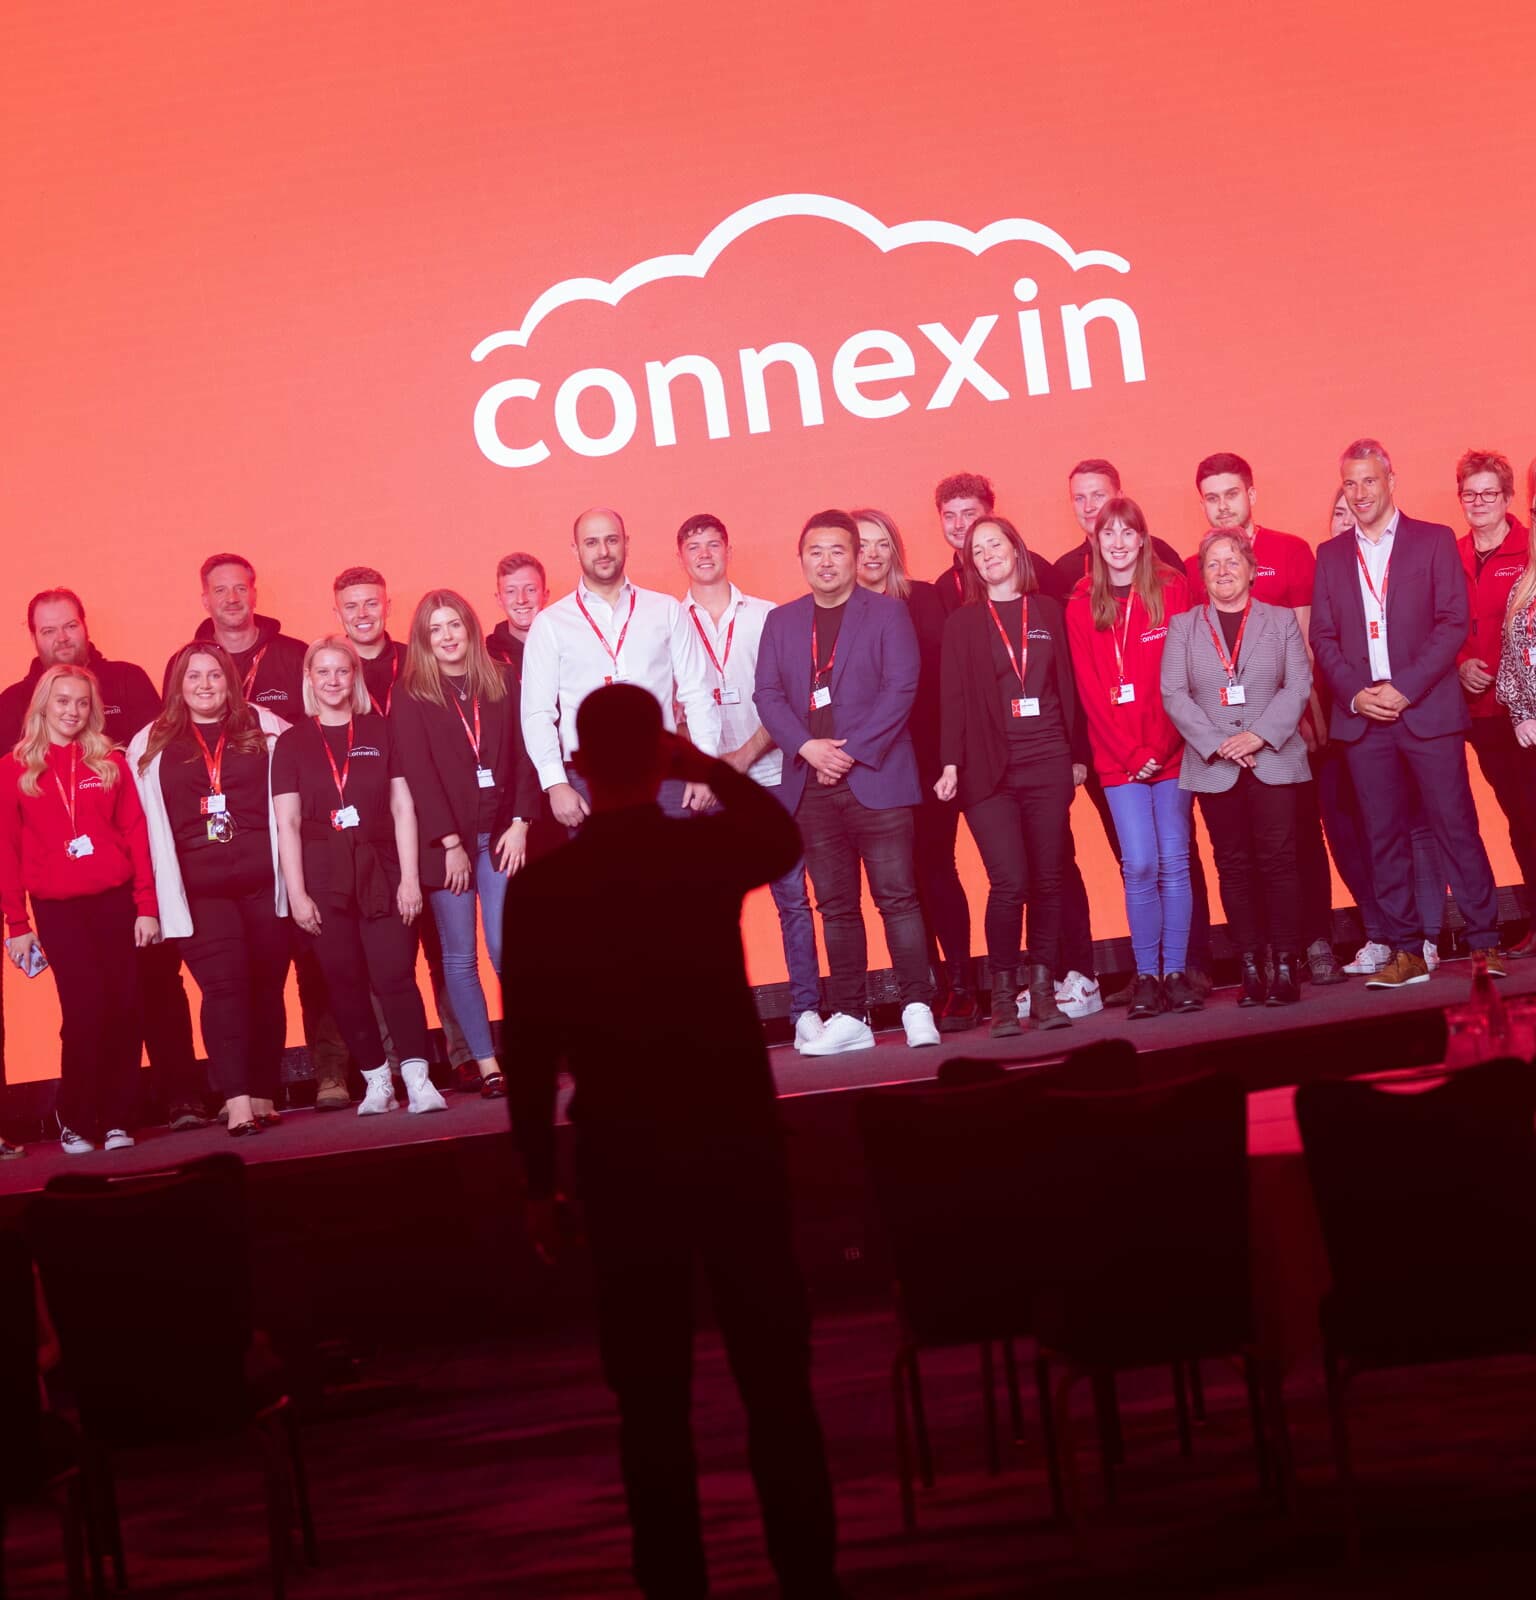 Team photo of staff at Connexin